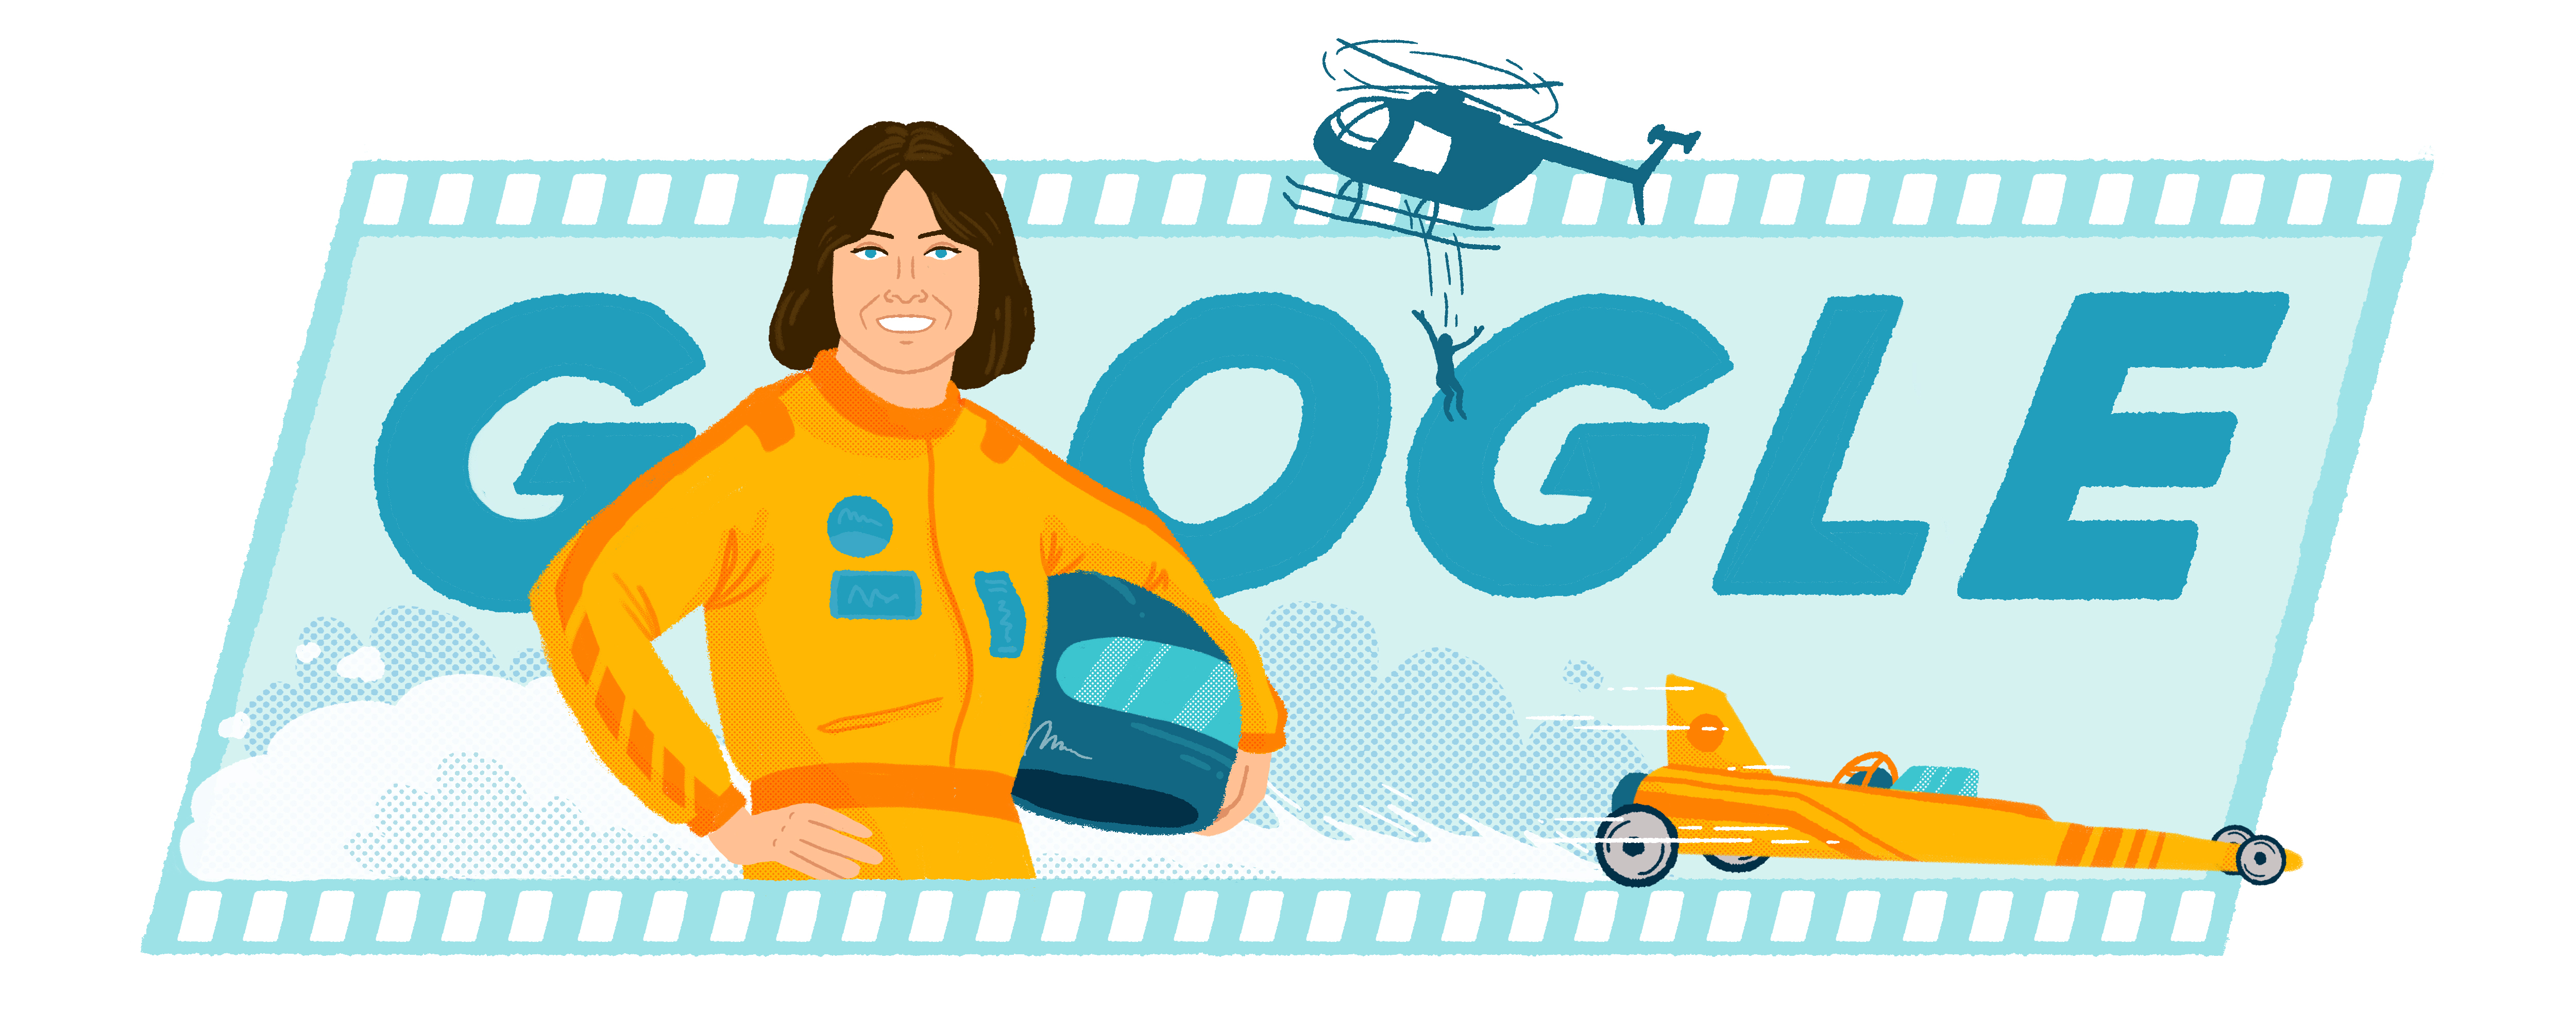 Illustration of Kitty O'Neil in a yellow racing suit holding a helmet standing in front of the GOOGLE logo. She has shoulder-length brown hair, blue eyes, and fair skin. In the background is a race car and helicopter with a person jumping. The scene sits within a large film strip shape.